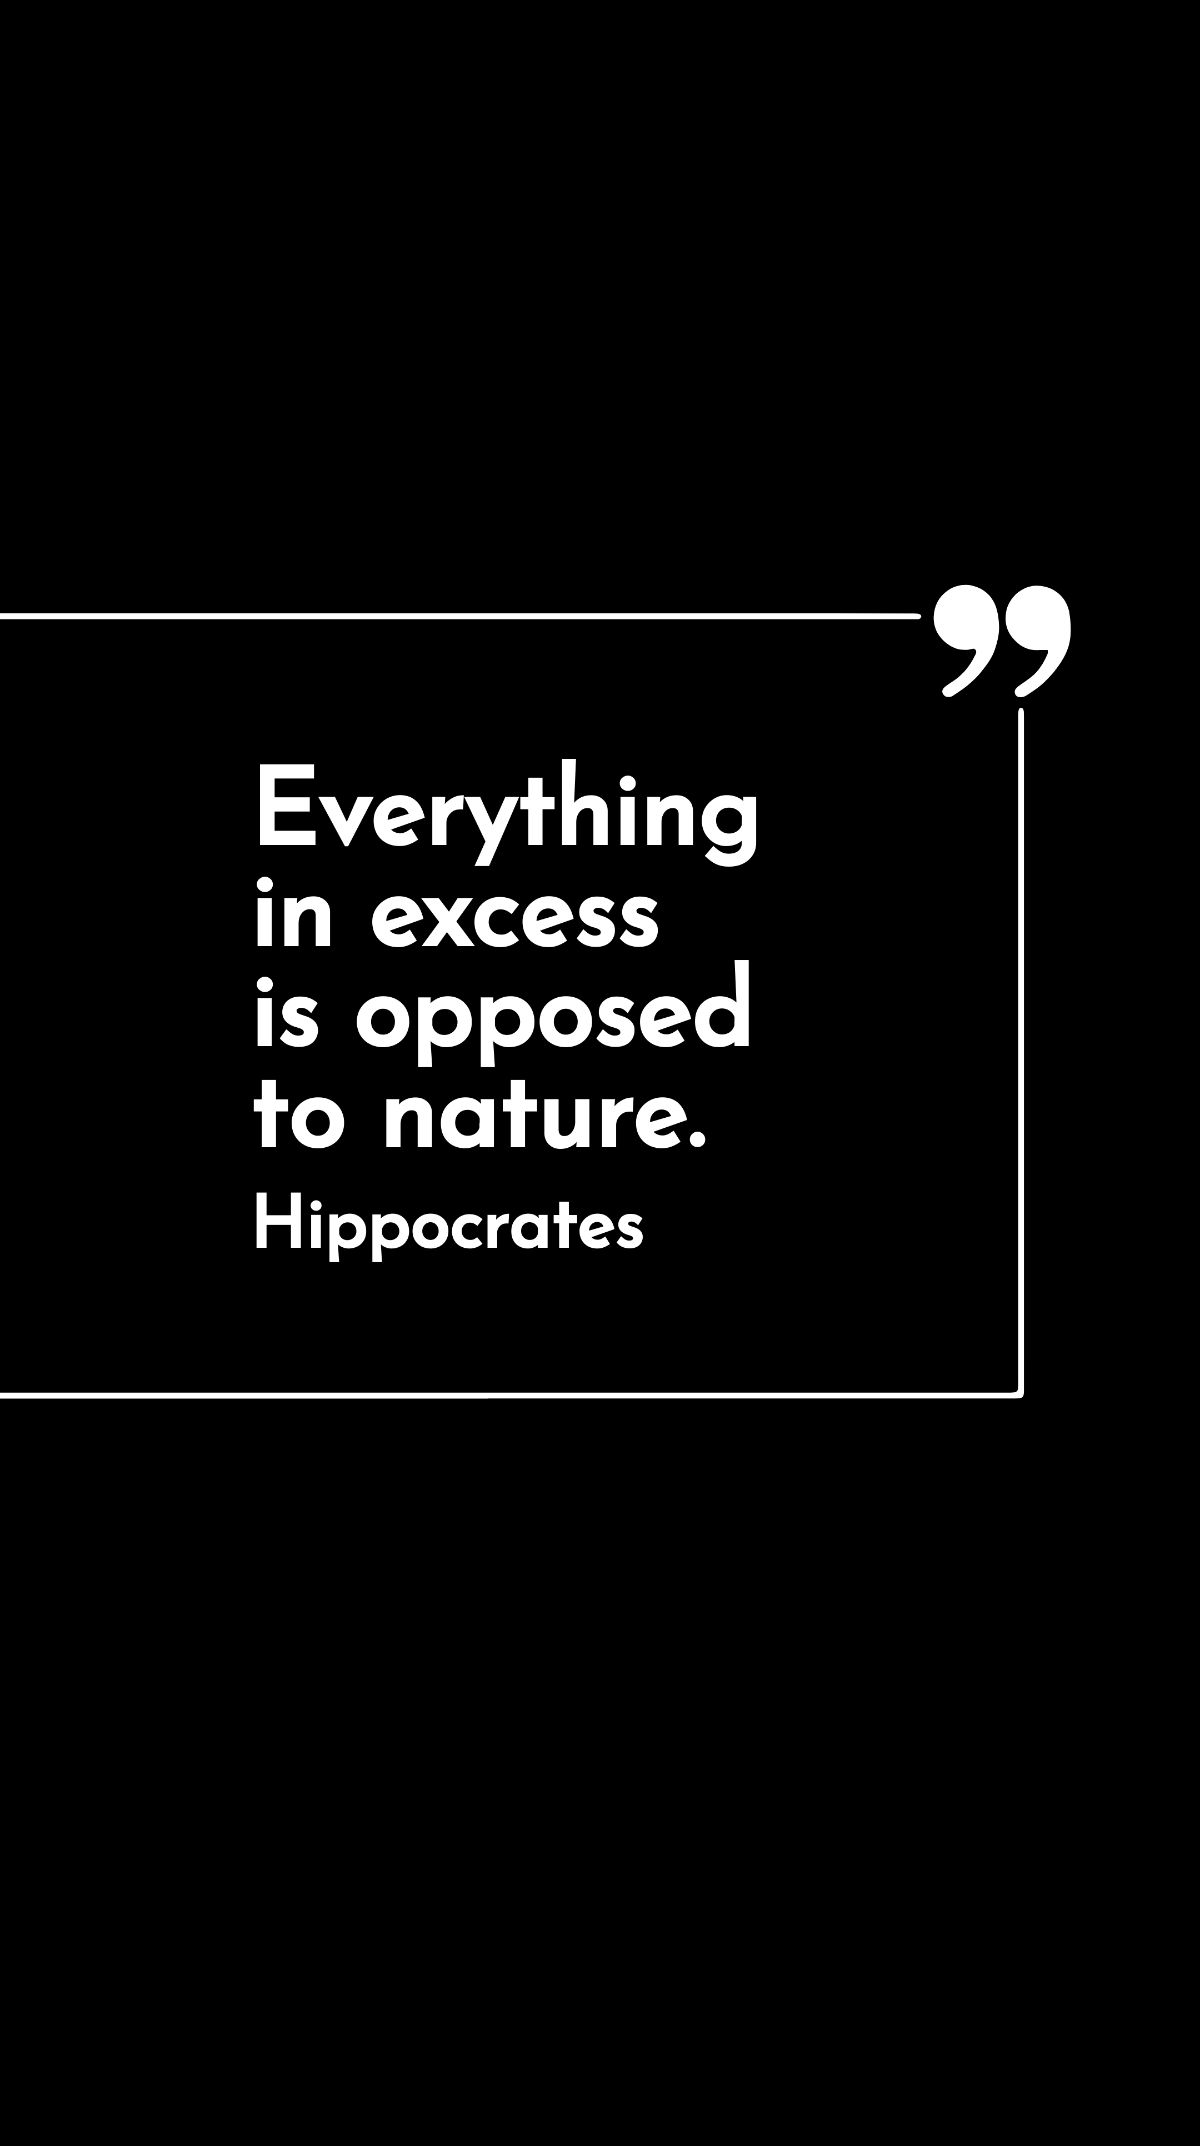 Hippocrates - Everything in excess is opposed to nature. Template